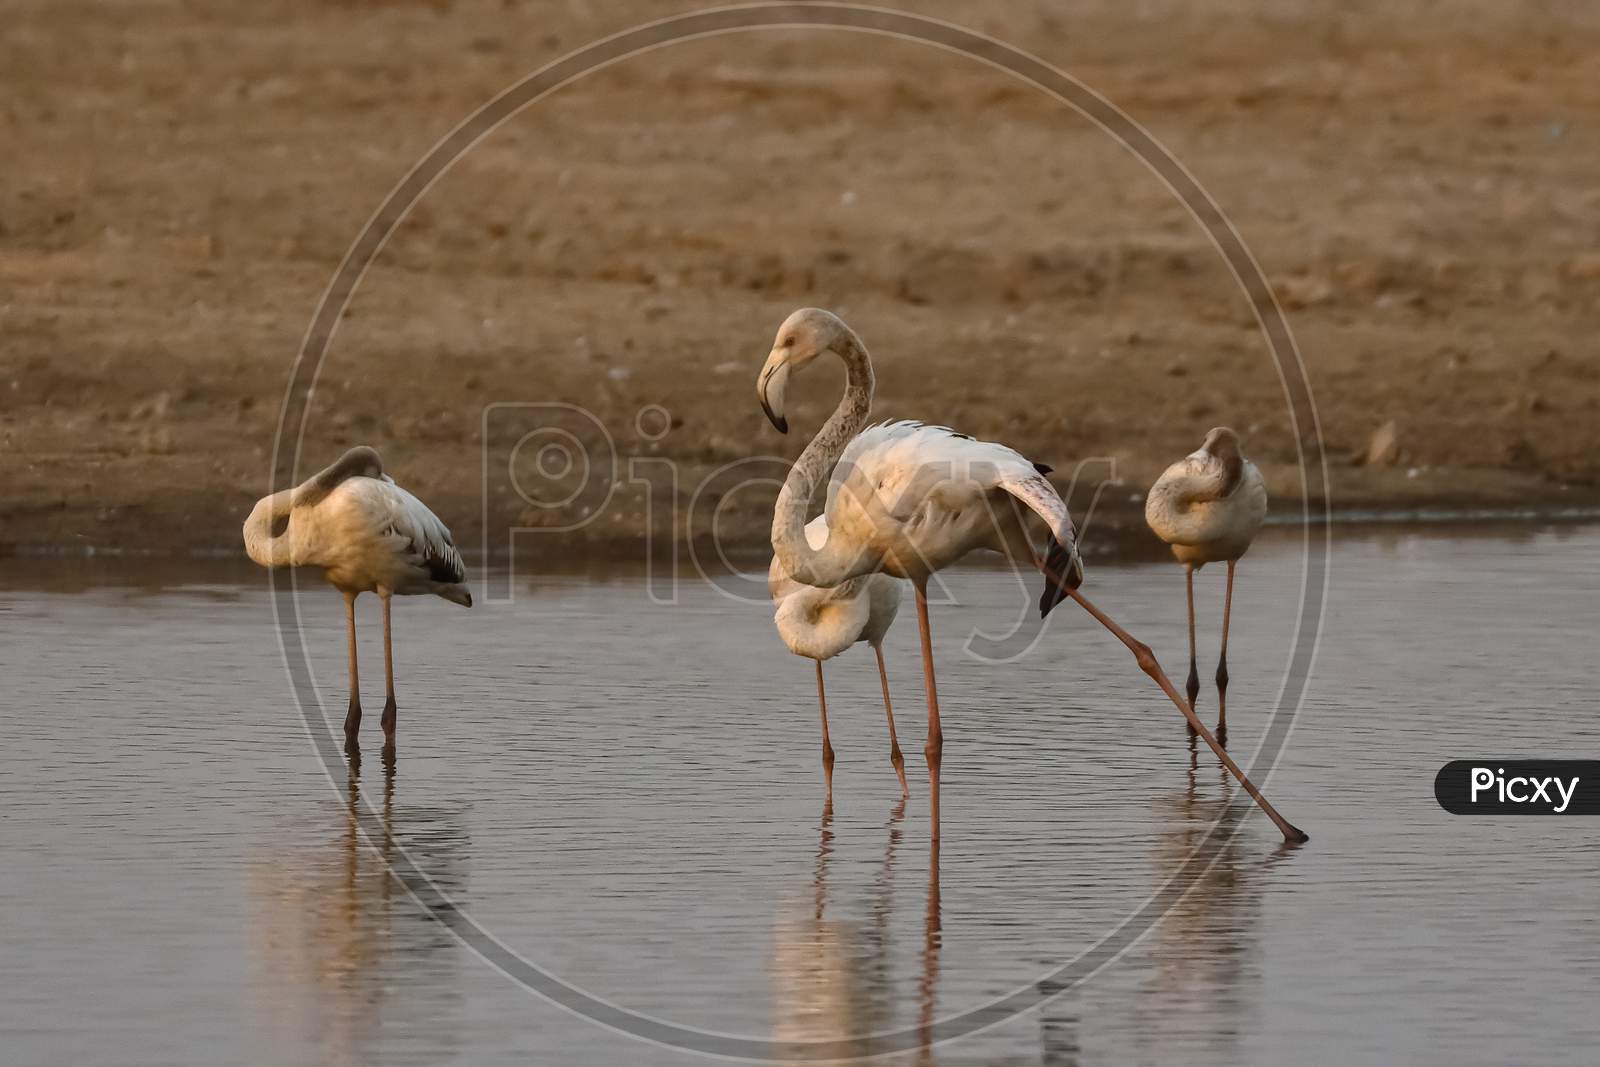 A greater flamingo displaying and practicing its dancing skills